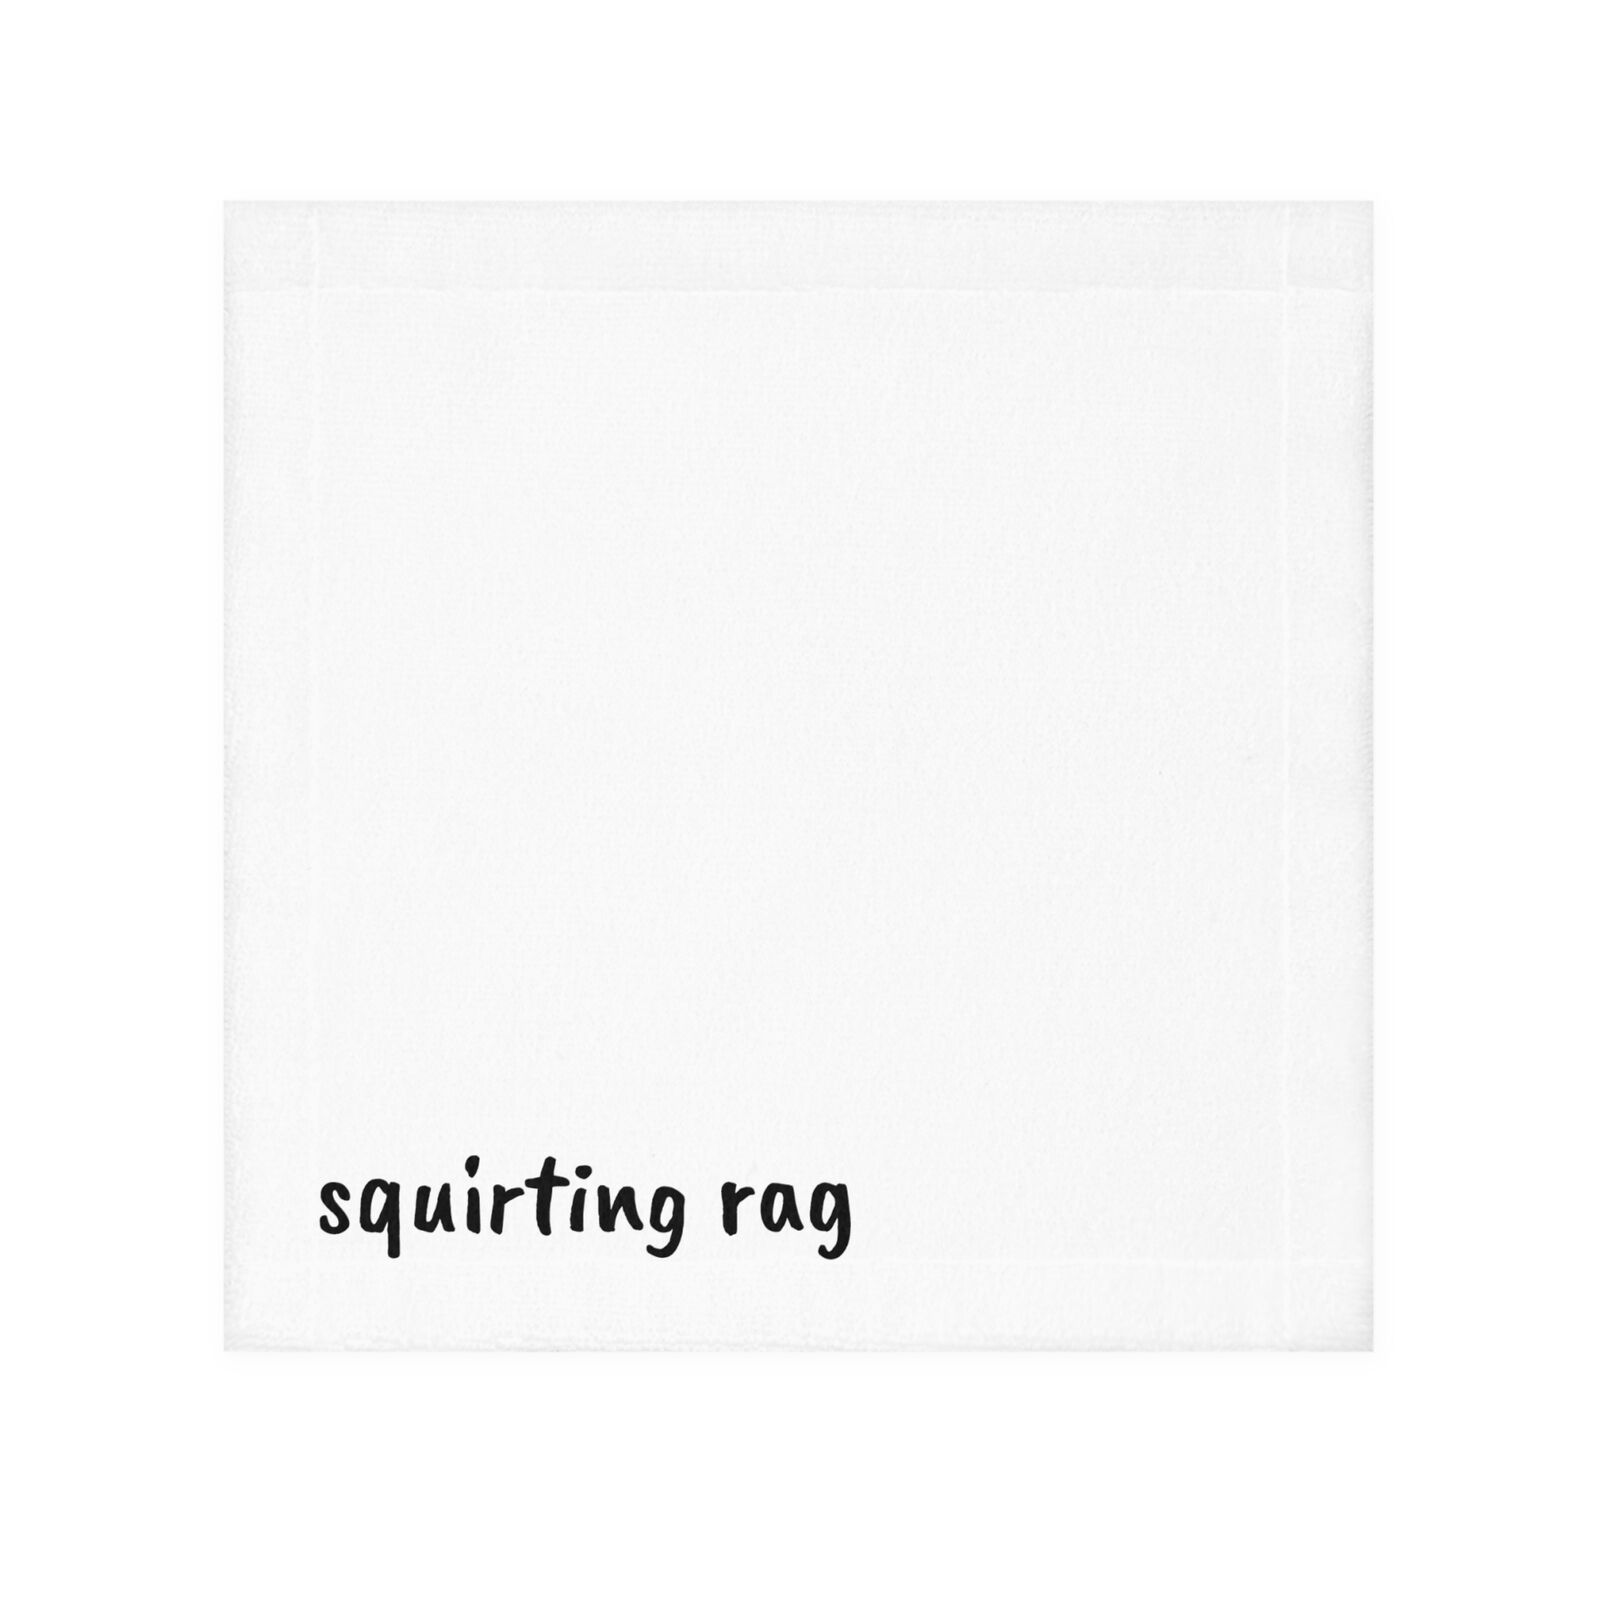 Squirting Rag For Her Cum Rag Naughty Gift For Him Bachelor Party Gag Gift